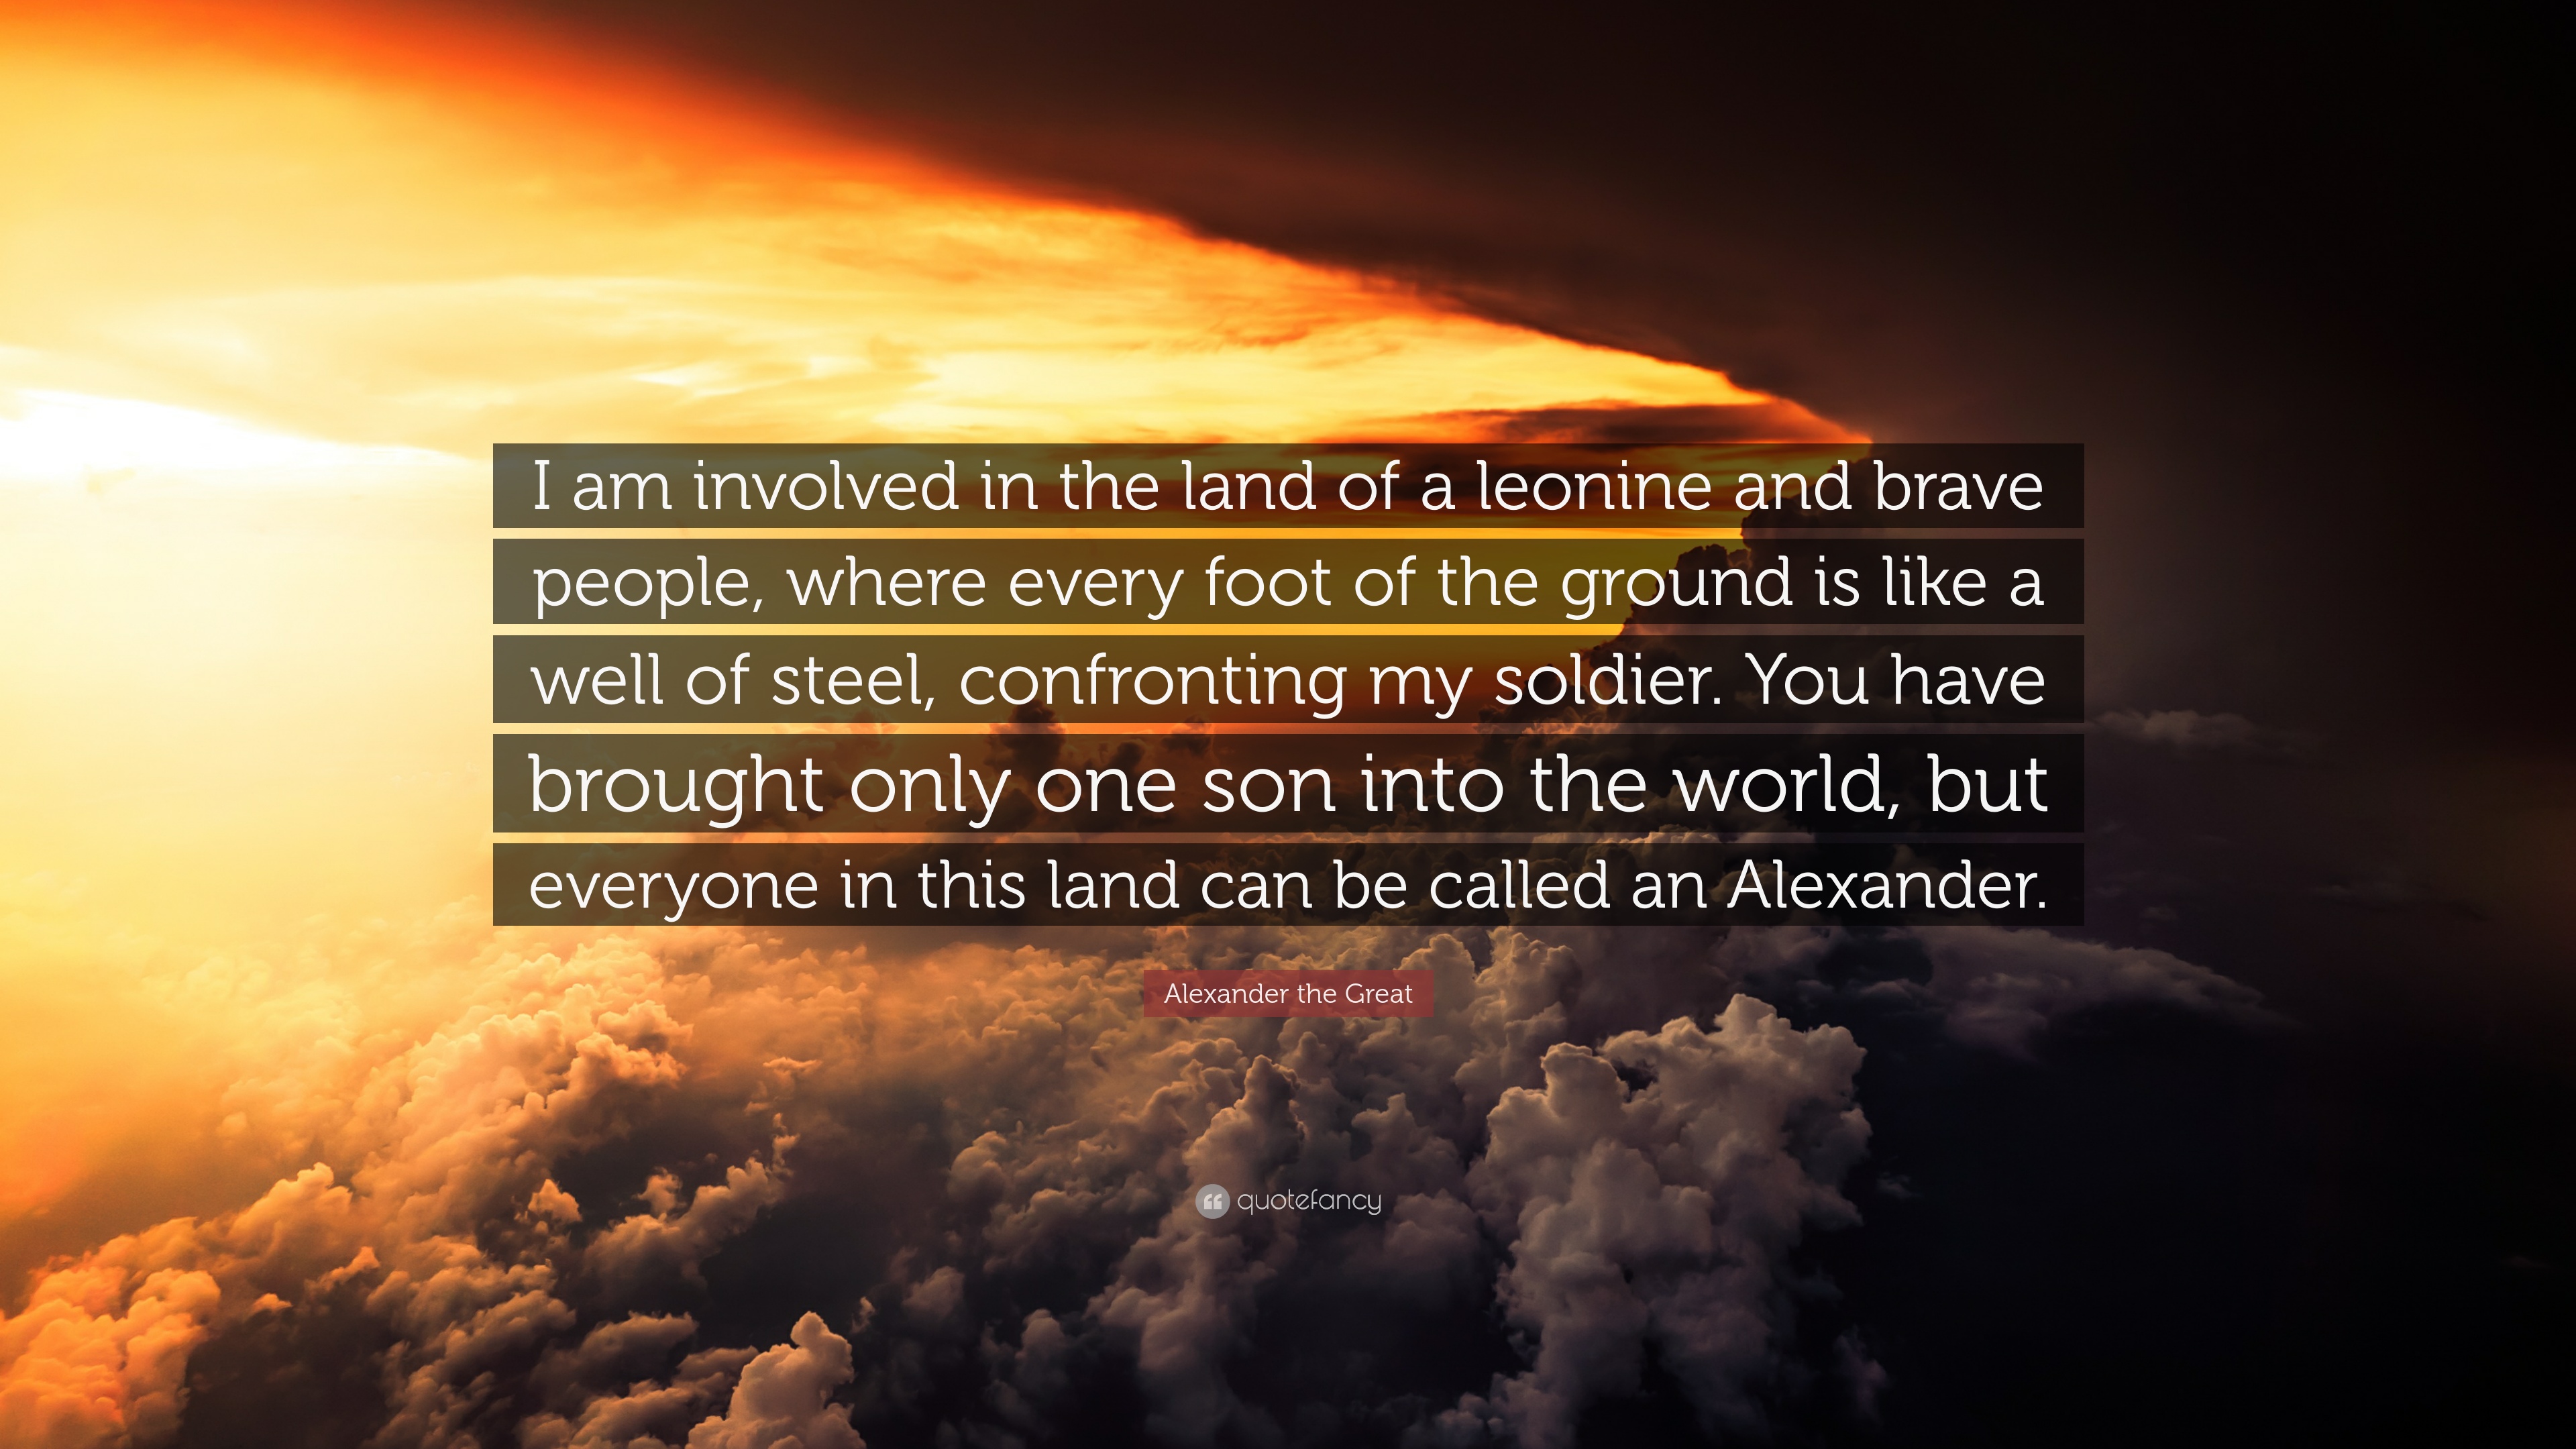 Alexander the Great Quote: “I am involved in the land of a leonine